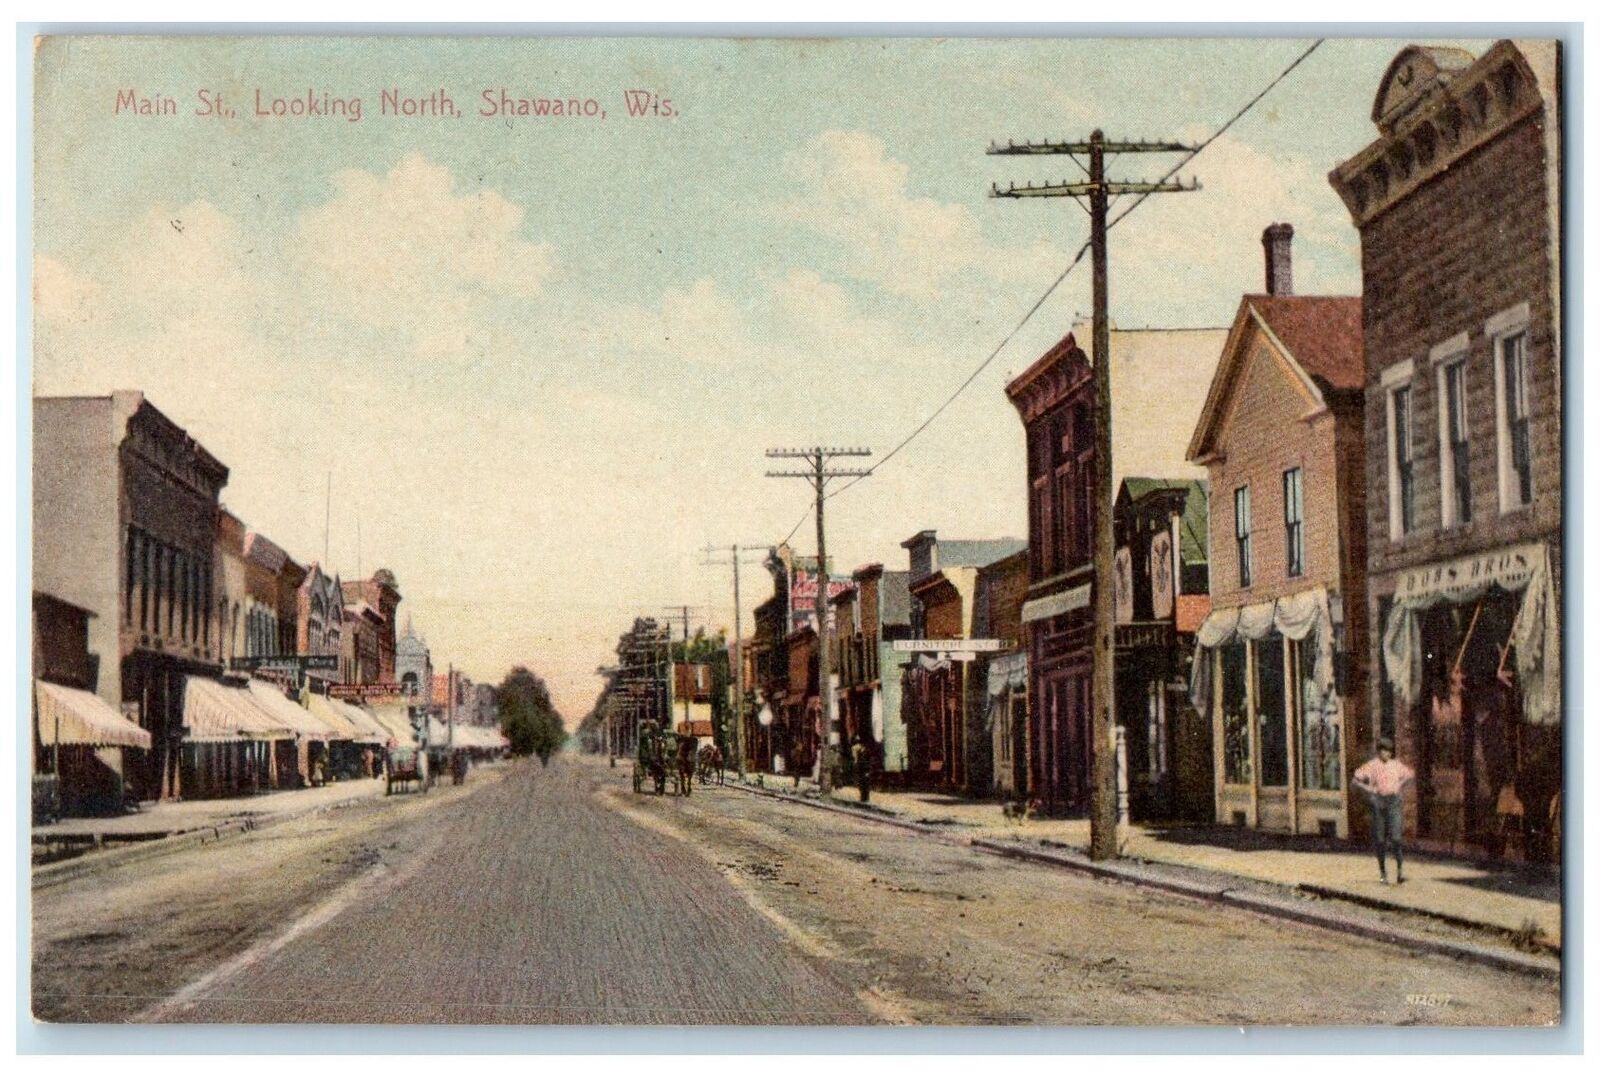 1909 Main St. Looking North Horse Carriage Dirt Road Shawano Wisconsin Postcard